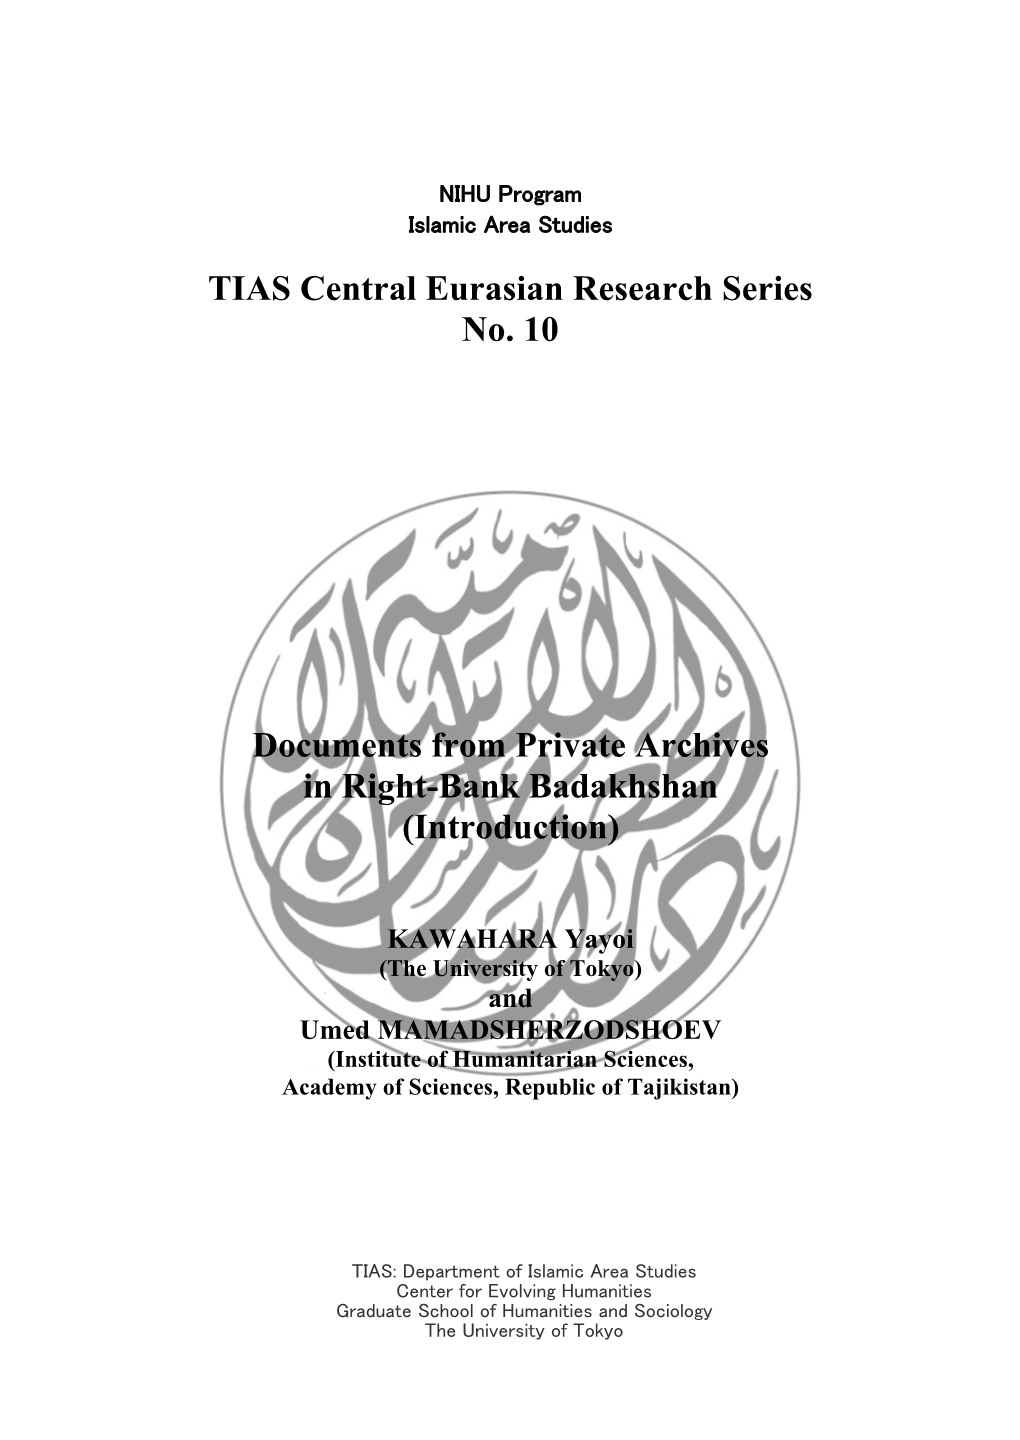 TIAS Central Eurasian Research Series No. 10 Documents From